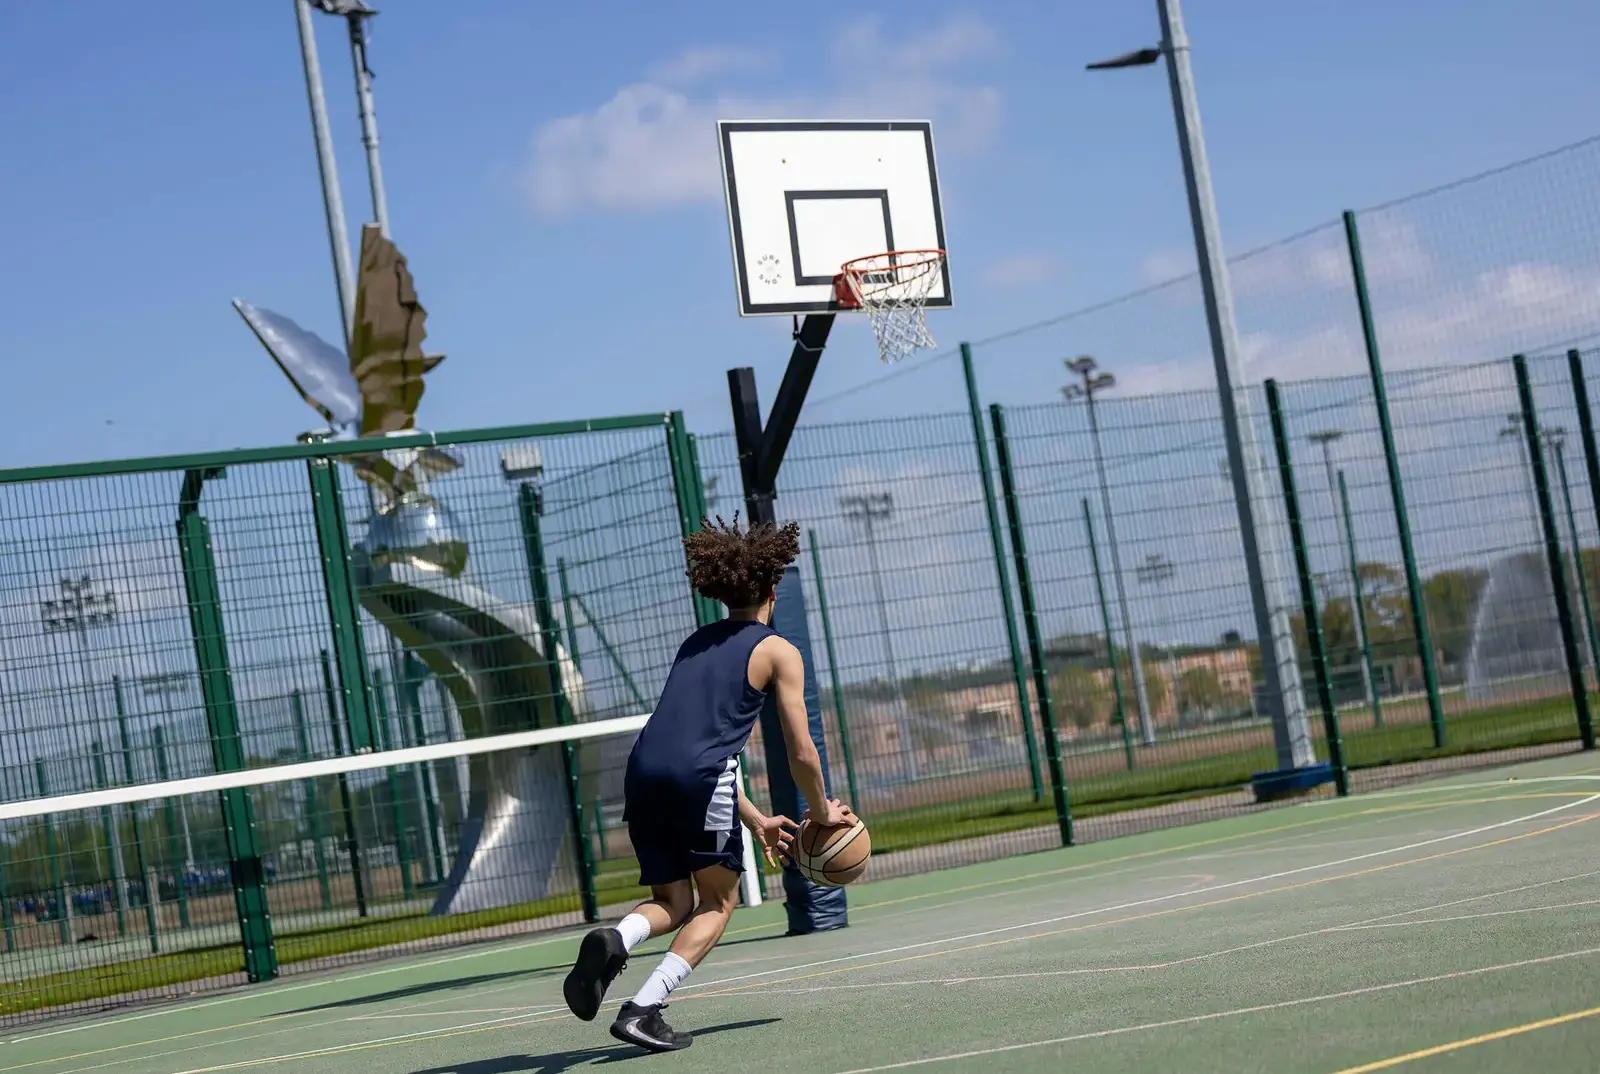 Play basketball as part of PE or compete at the county level with Queen Ethelburga’s Performance Sports Programme.